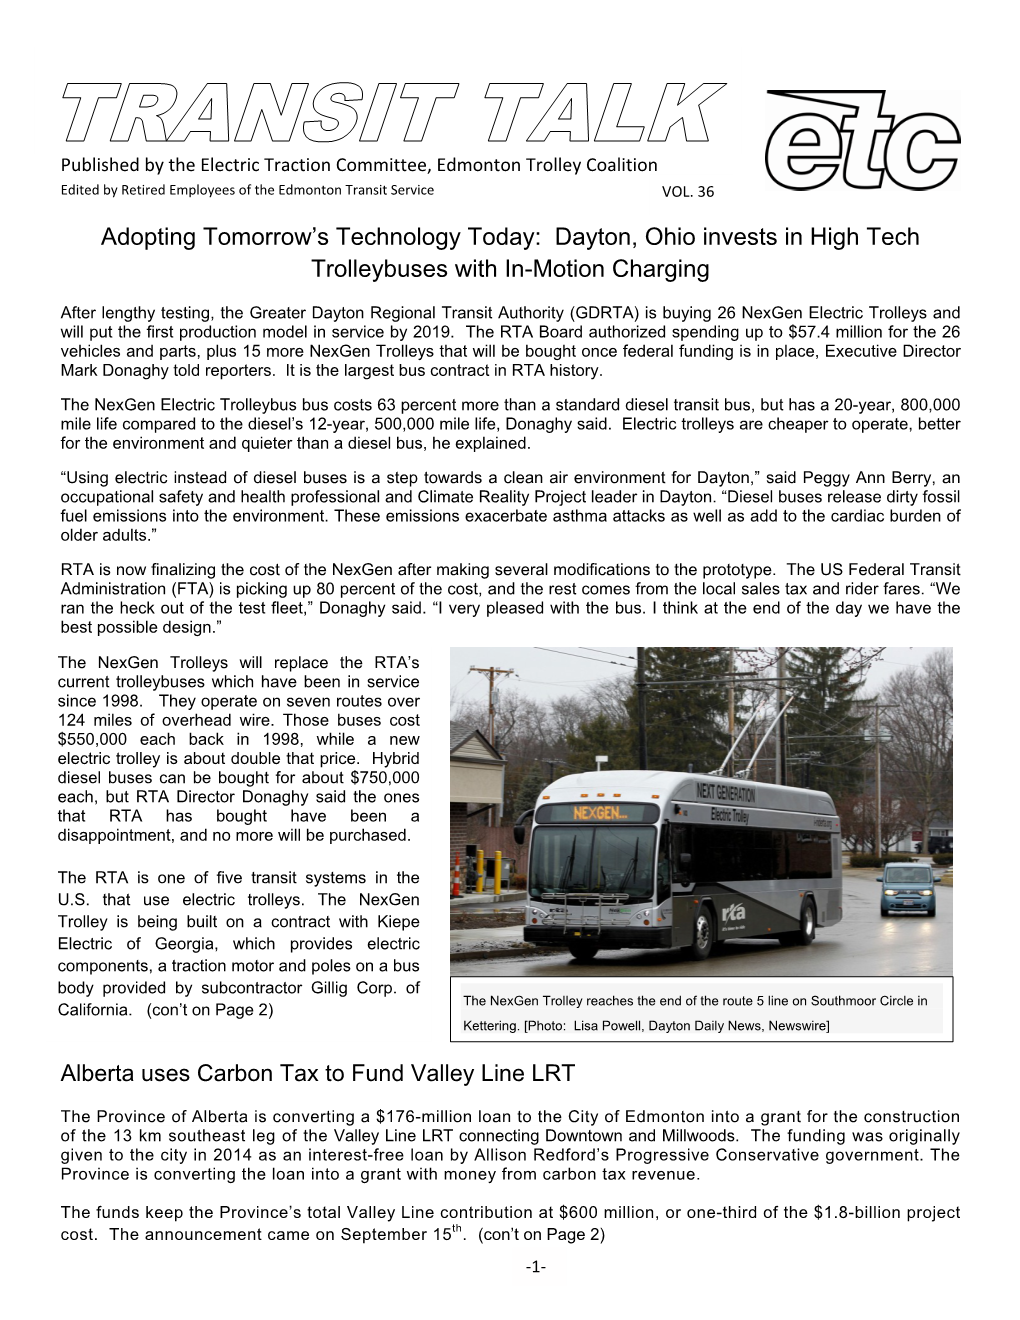 Dayton, Ohio Invests in High Tech Trolleybuses with In-Motion Charging